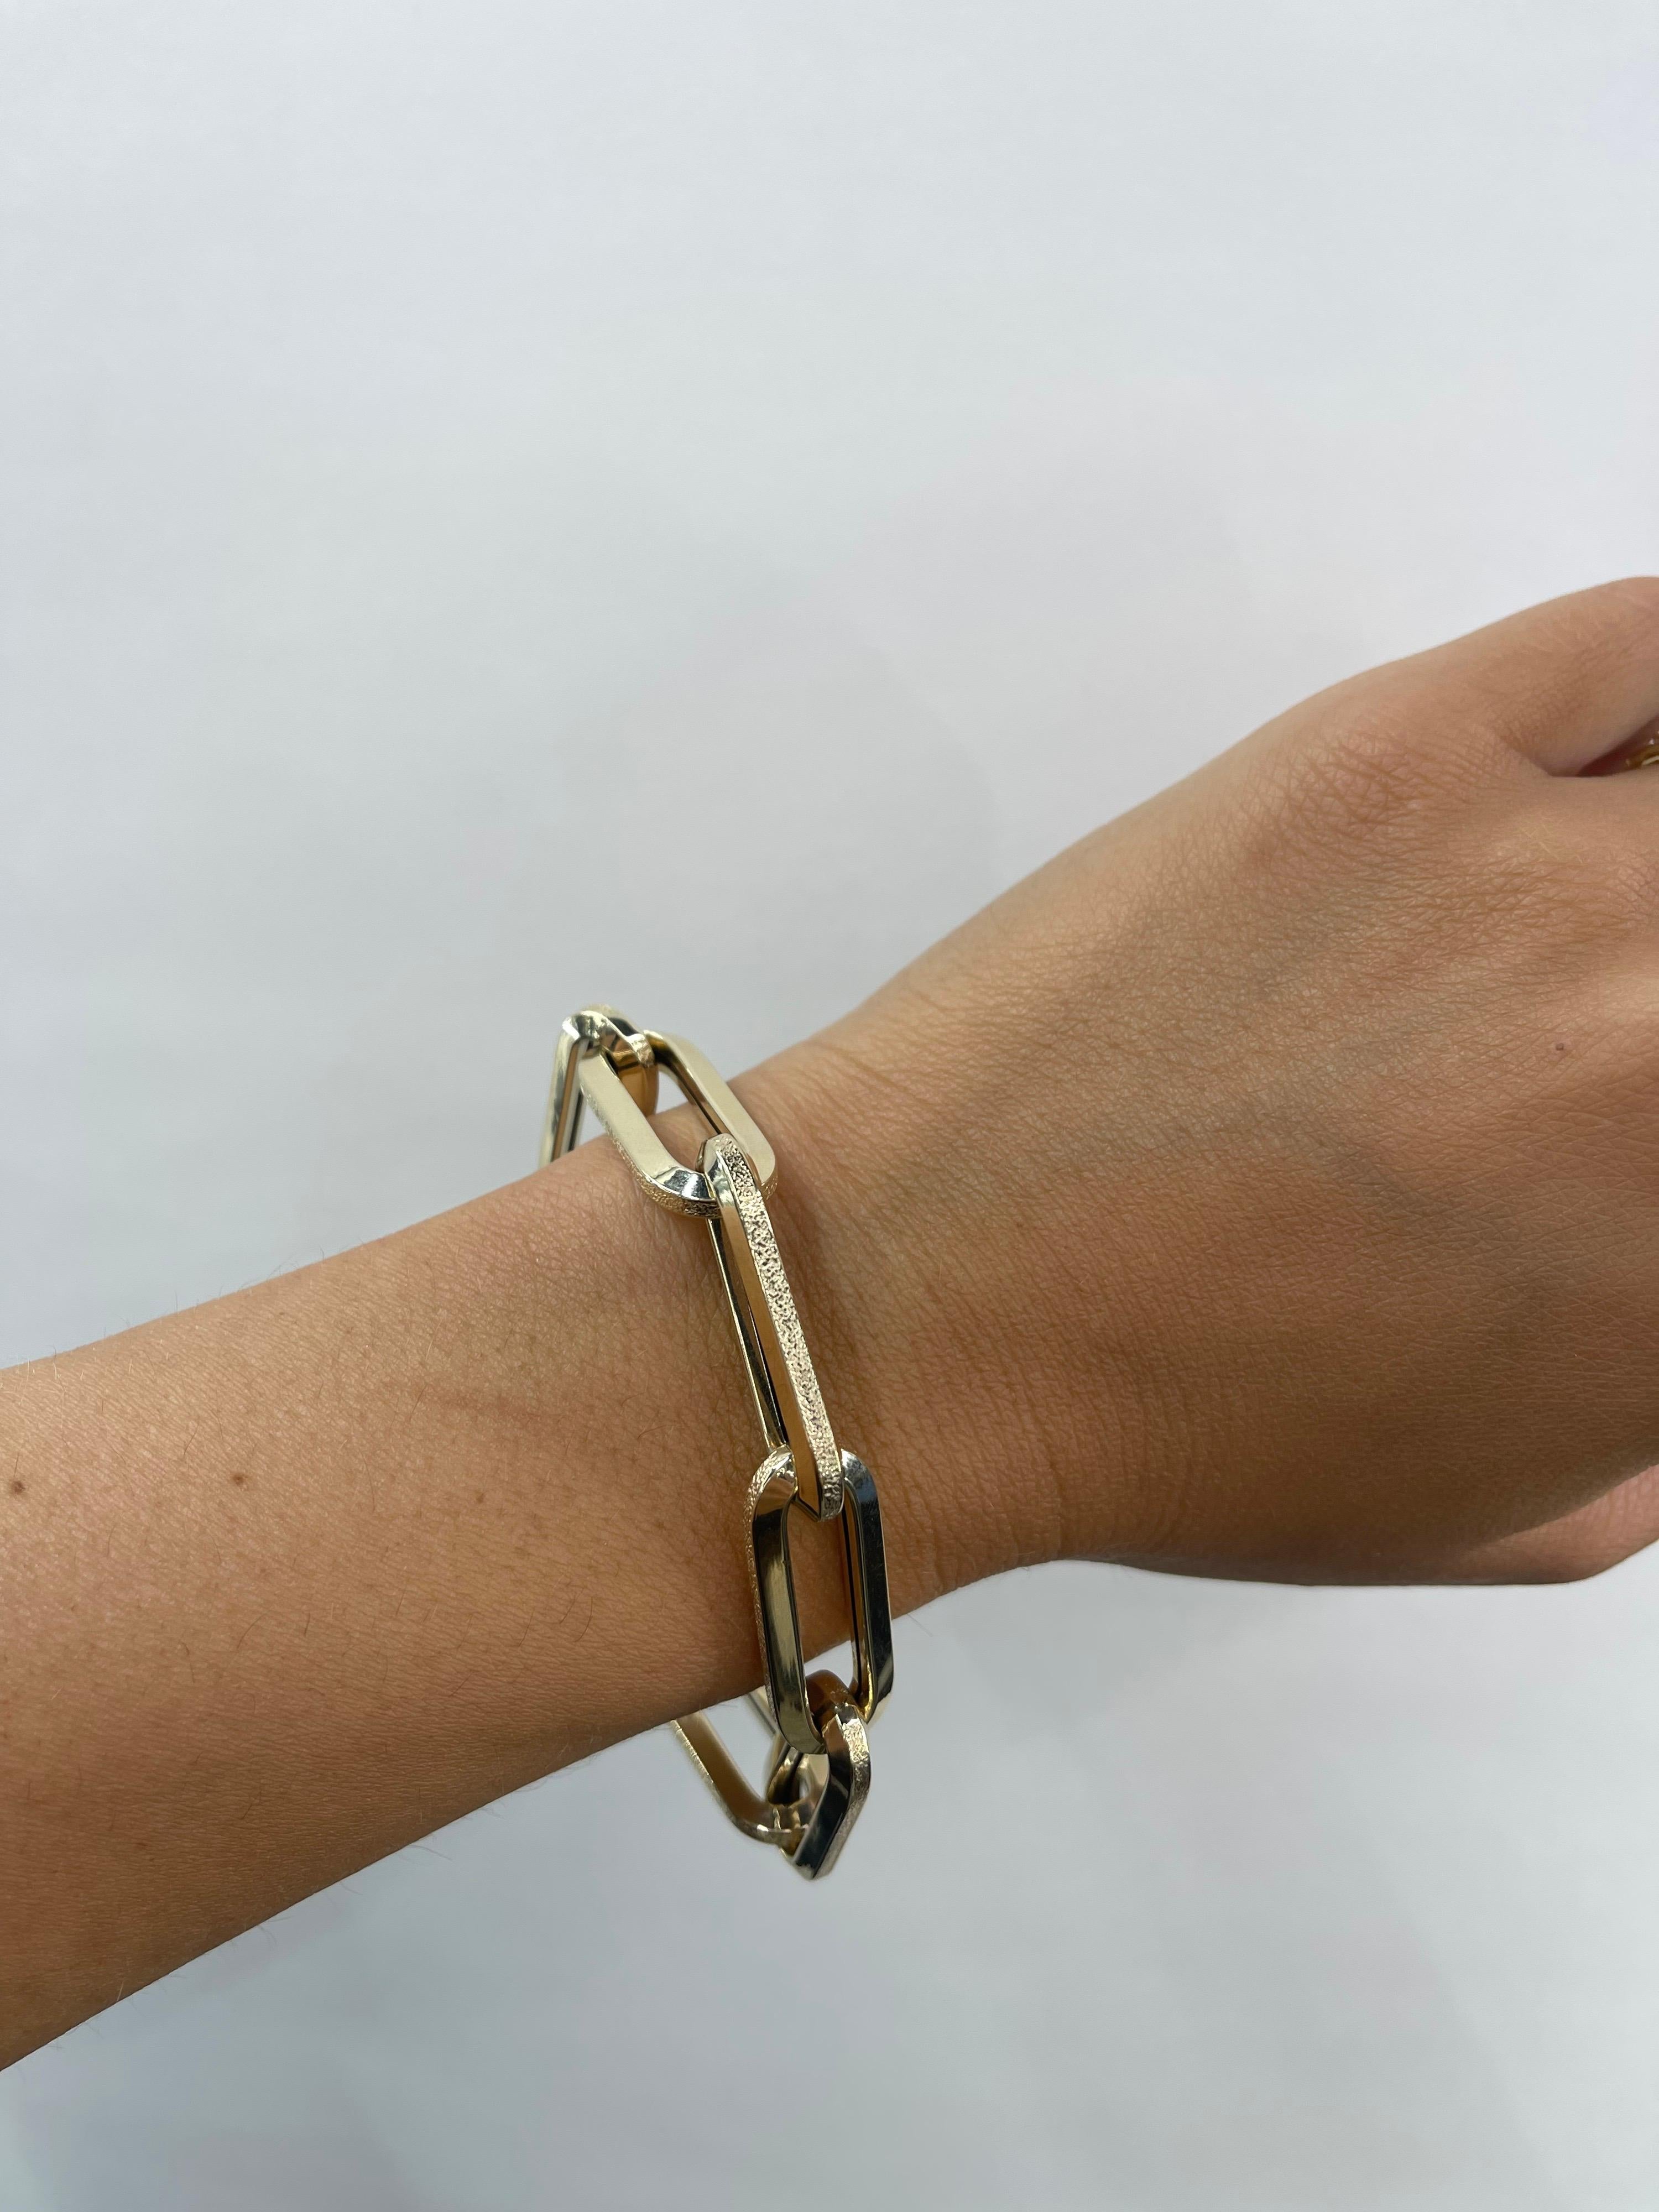 Modern 14 Karat Yellow Gold Textured Oversize Link Bracelet Made In Italy 11.23 Grams For Sale